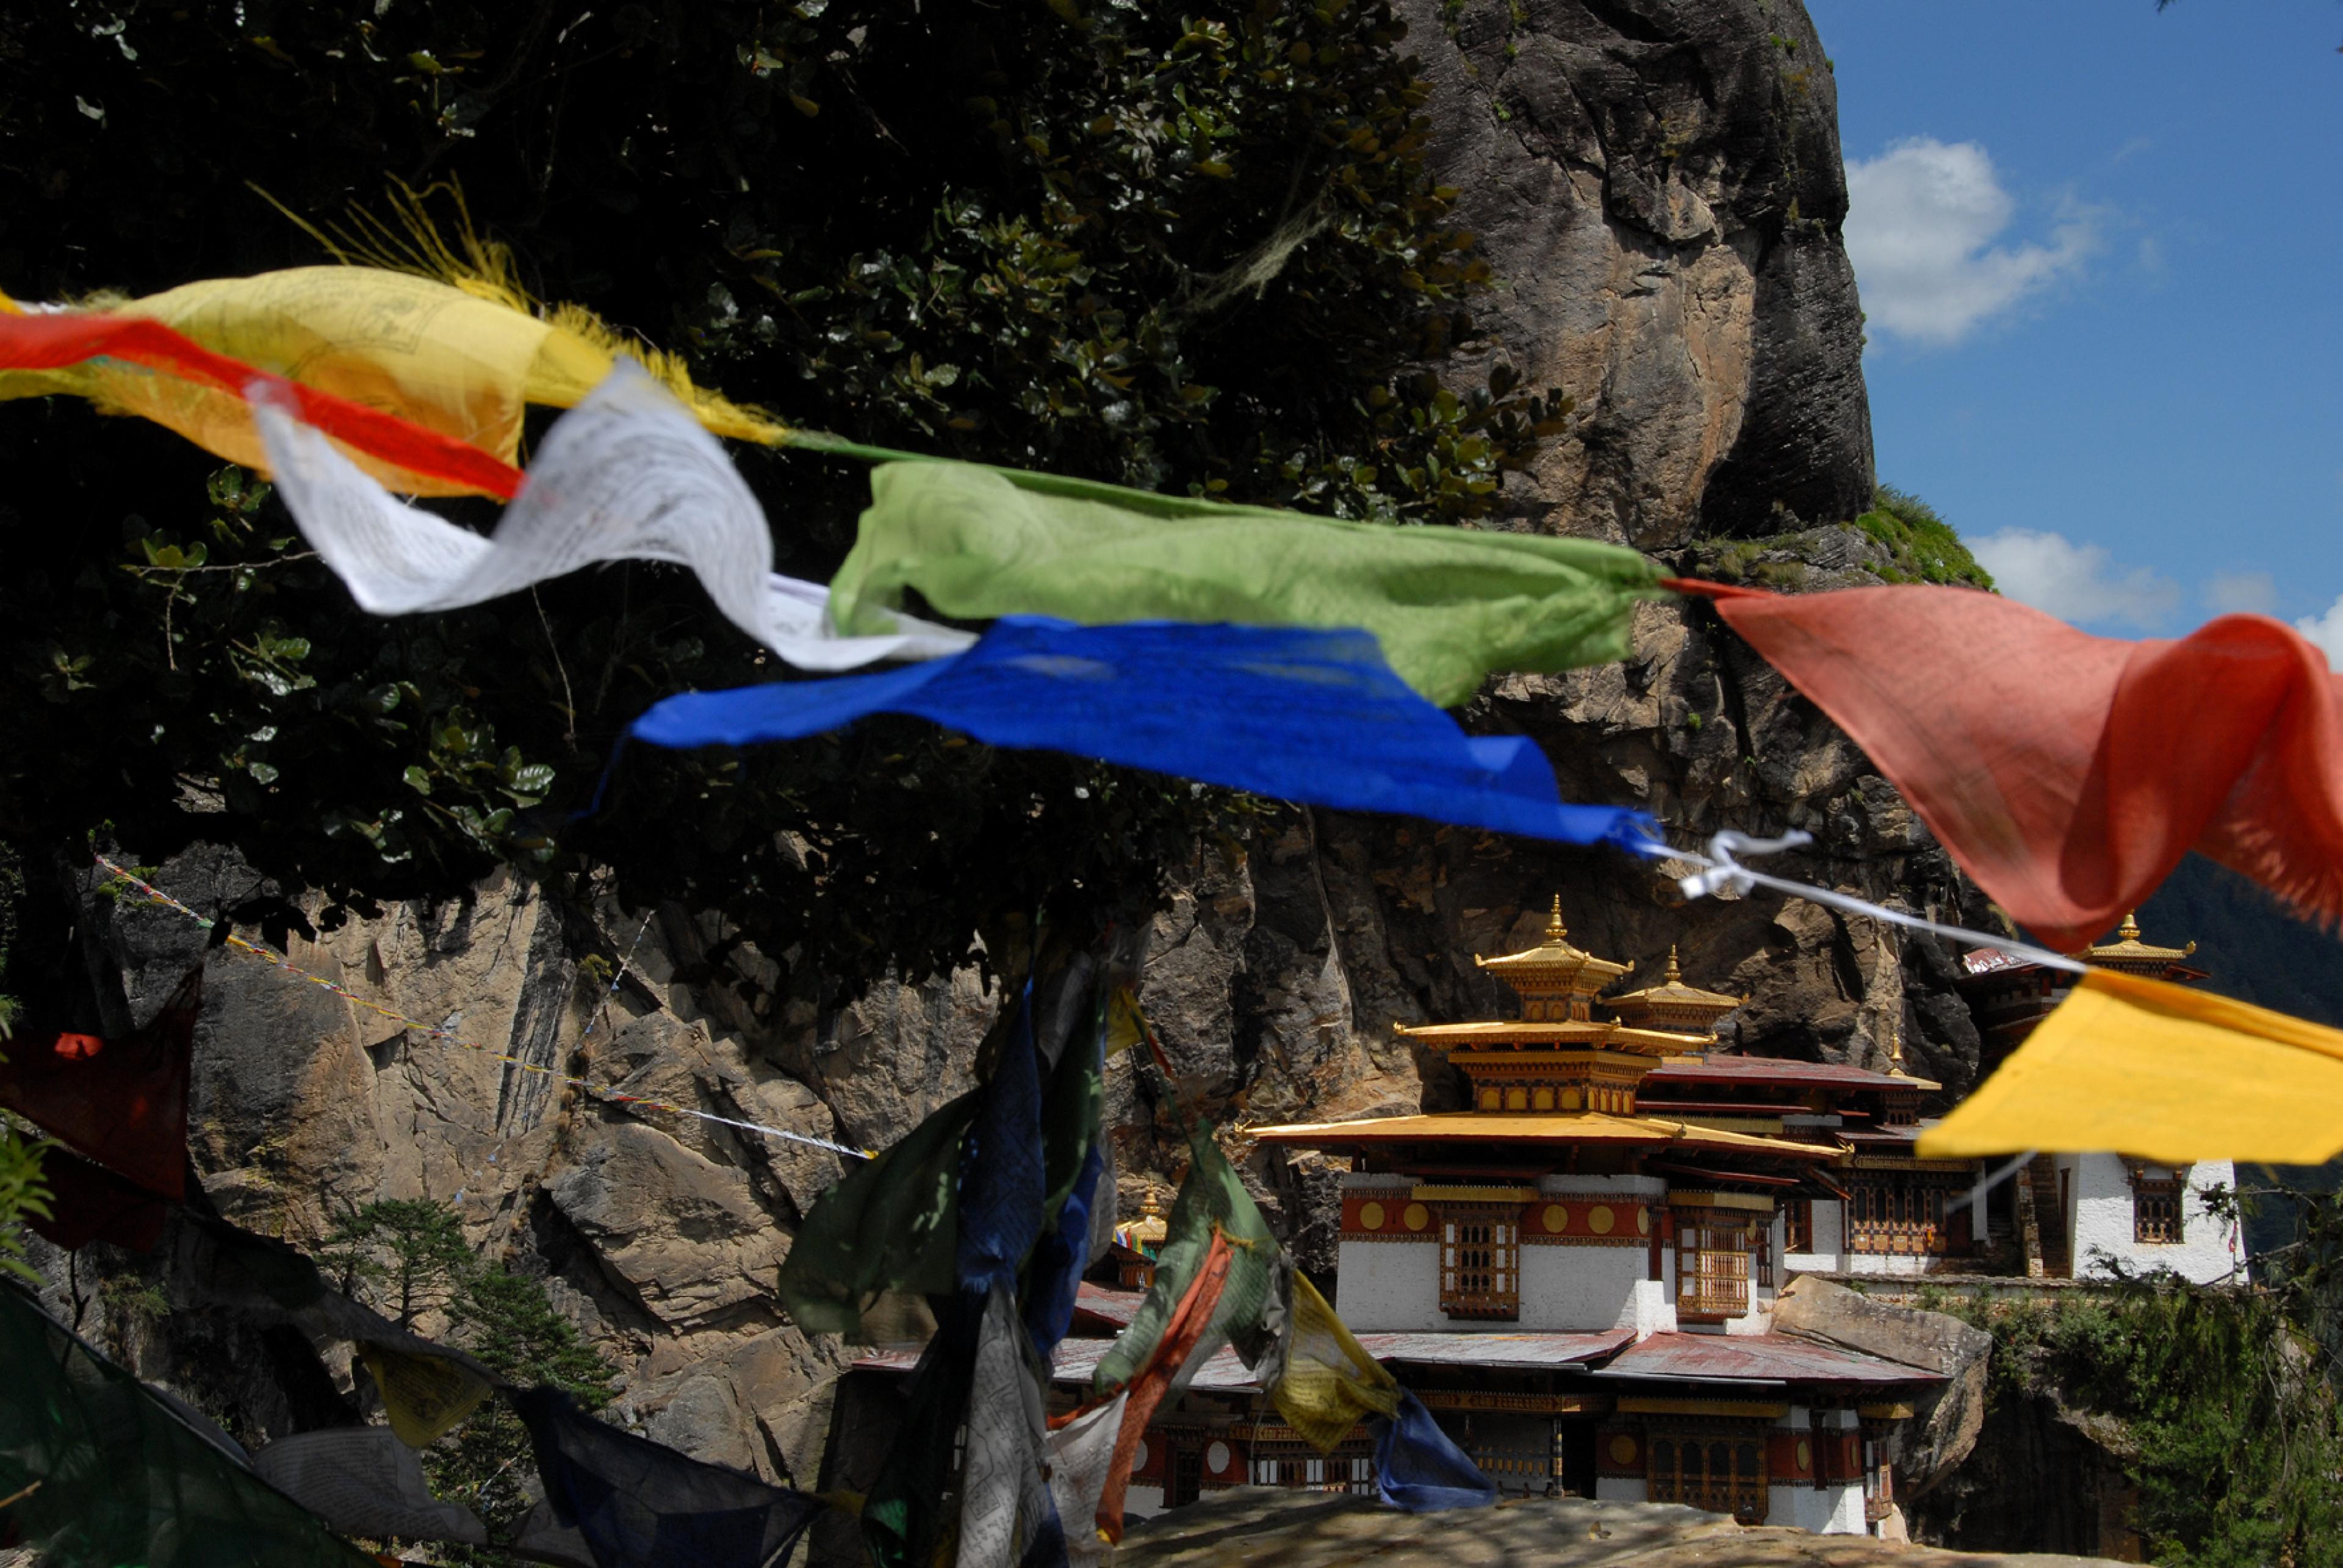 red, yellow, white and blue flags strung up on a hiking path to a buddhist temple